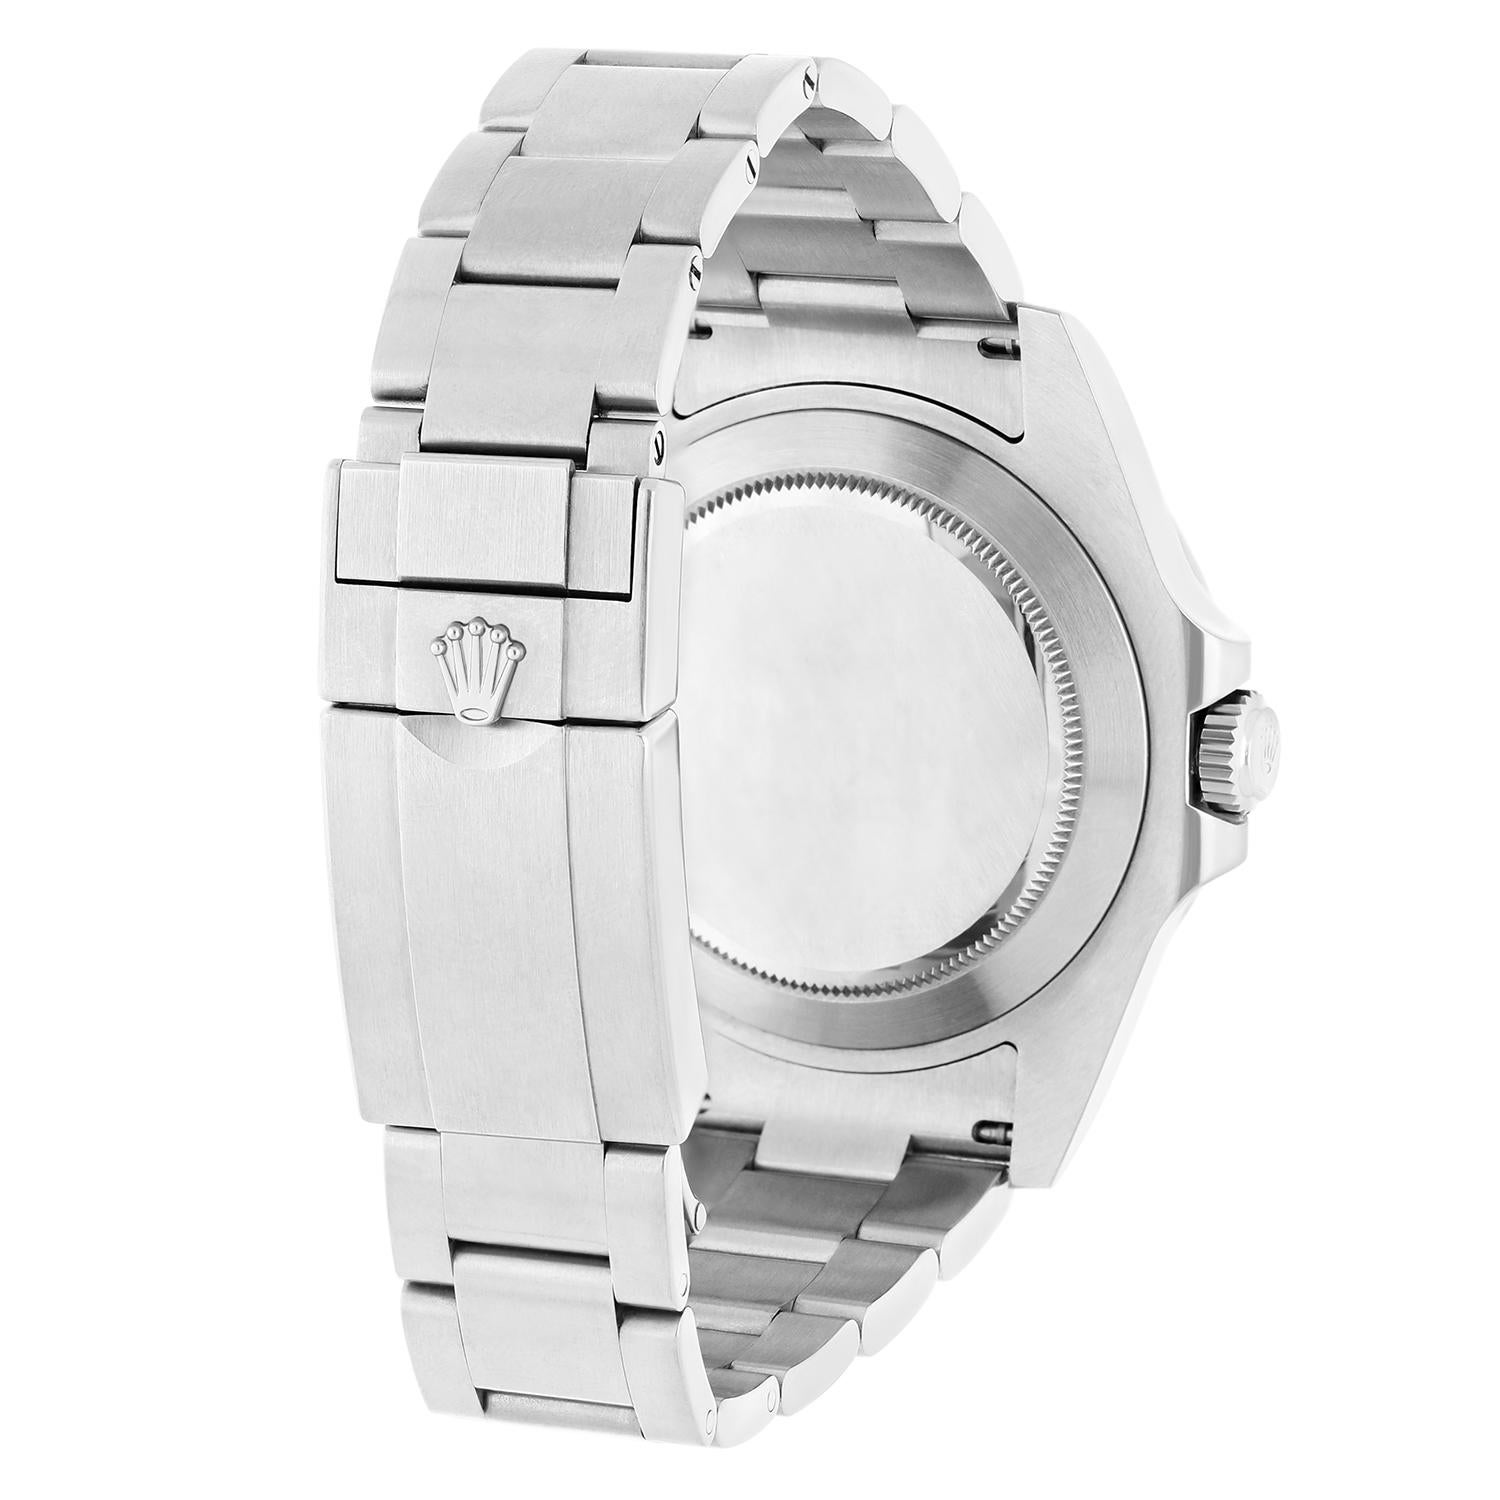 Rolex Explorer II 216570 White Dial Stainless Steel Mens Watch For Sale 3